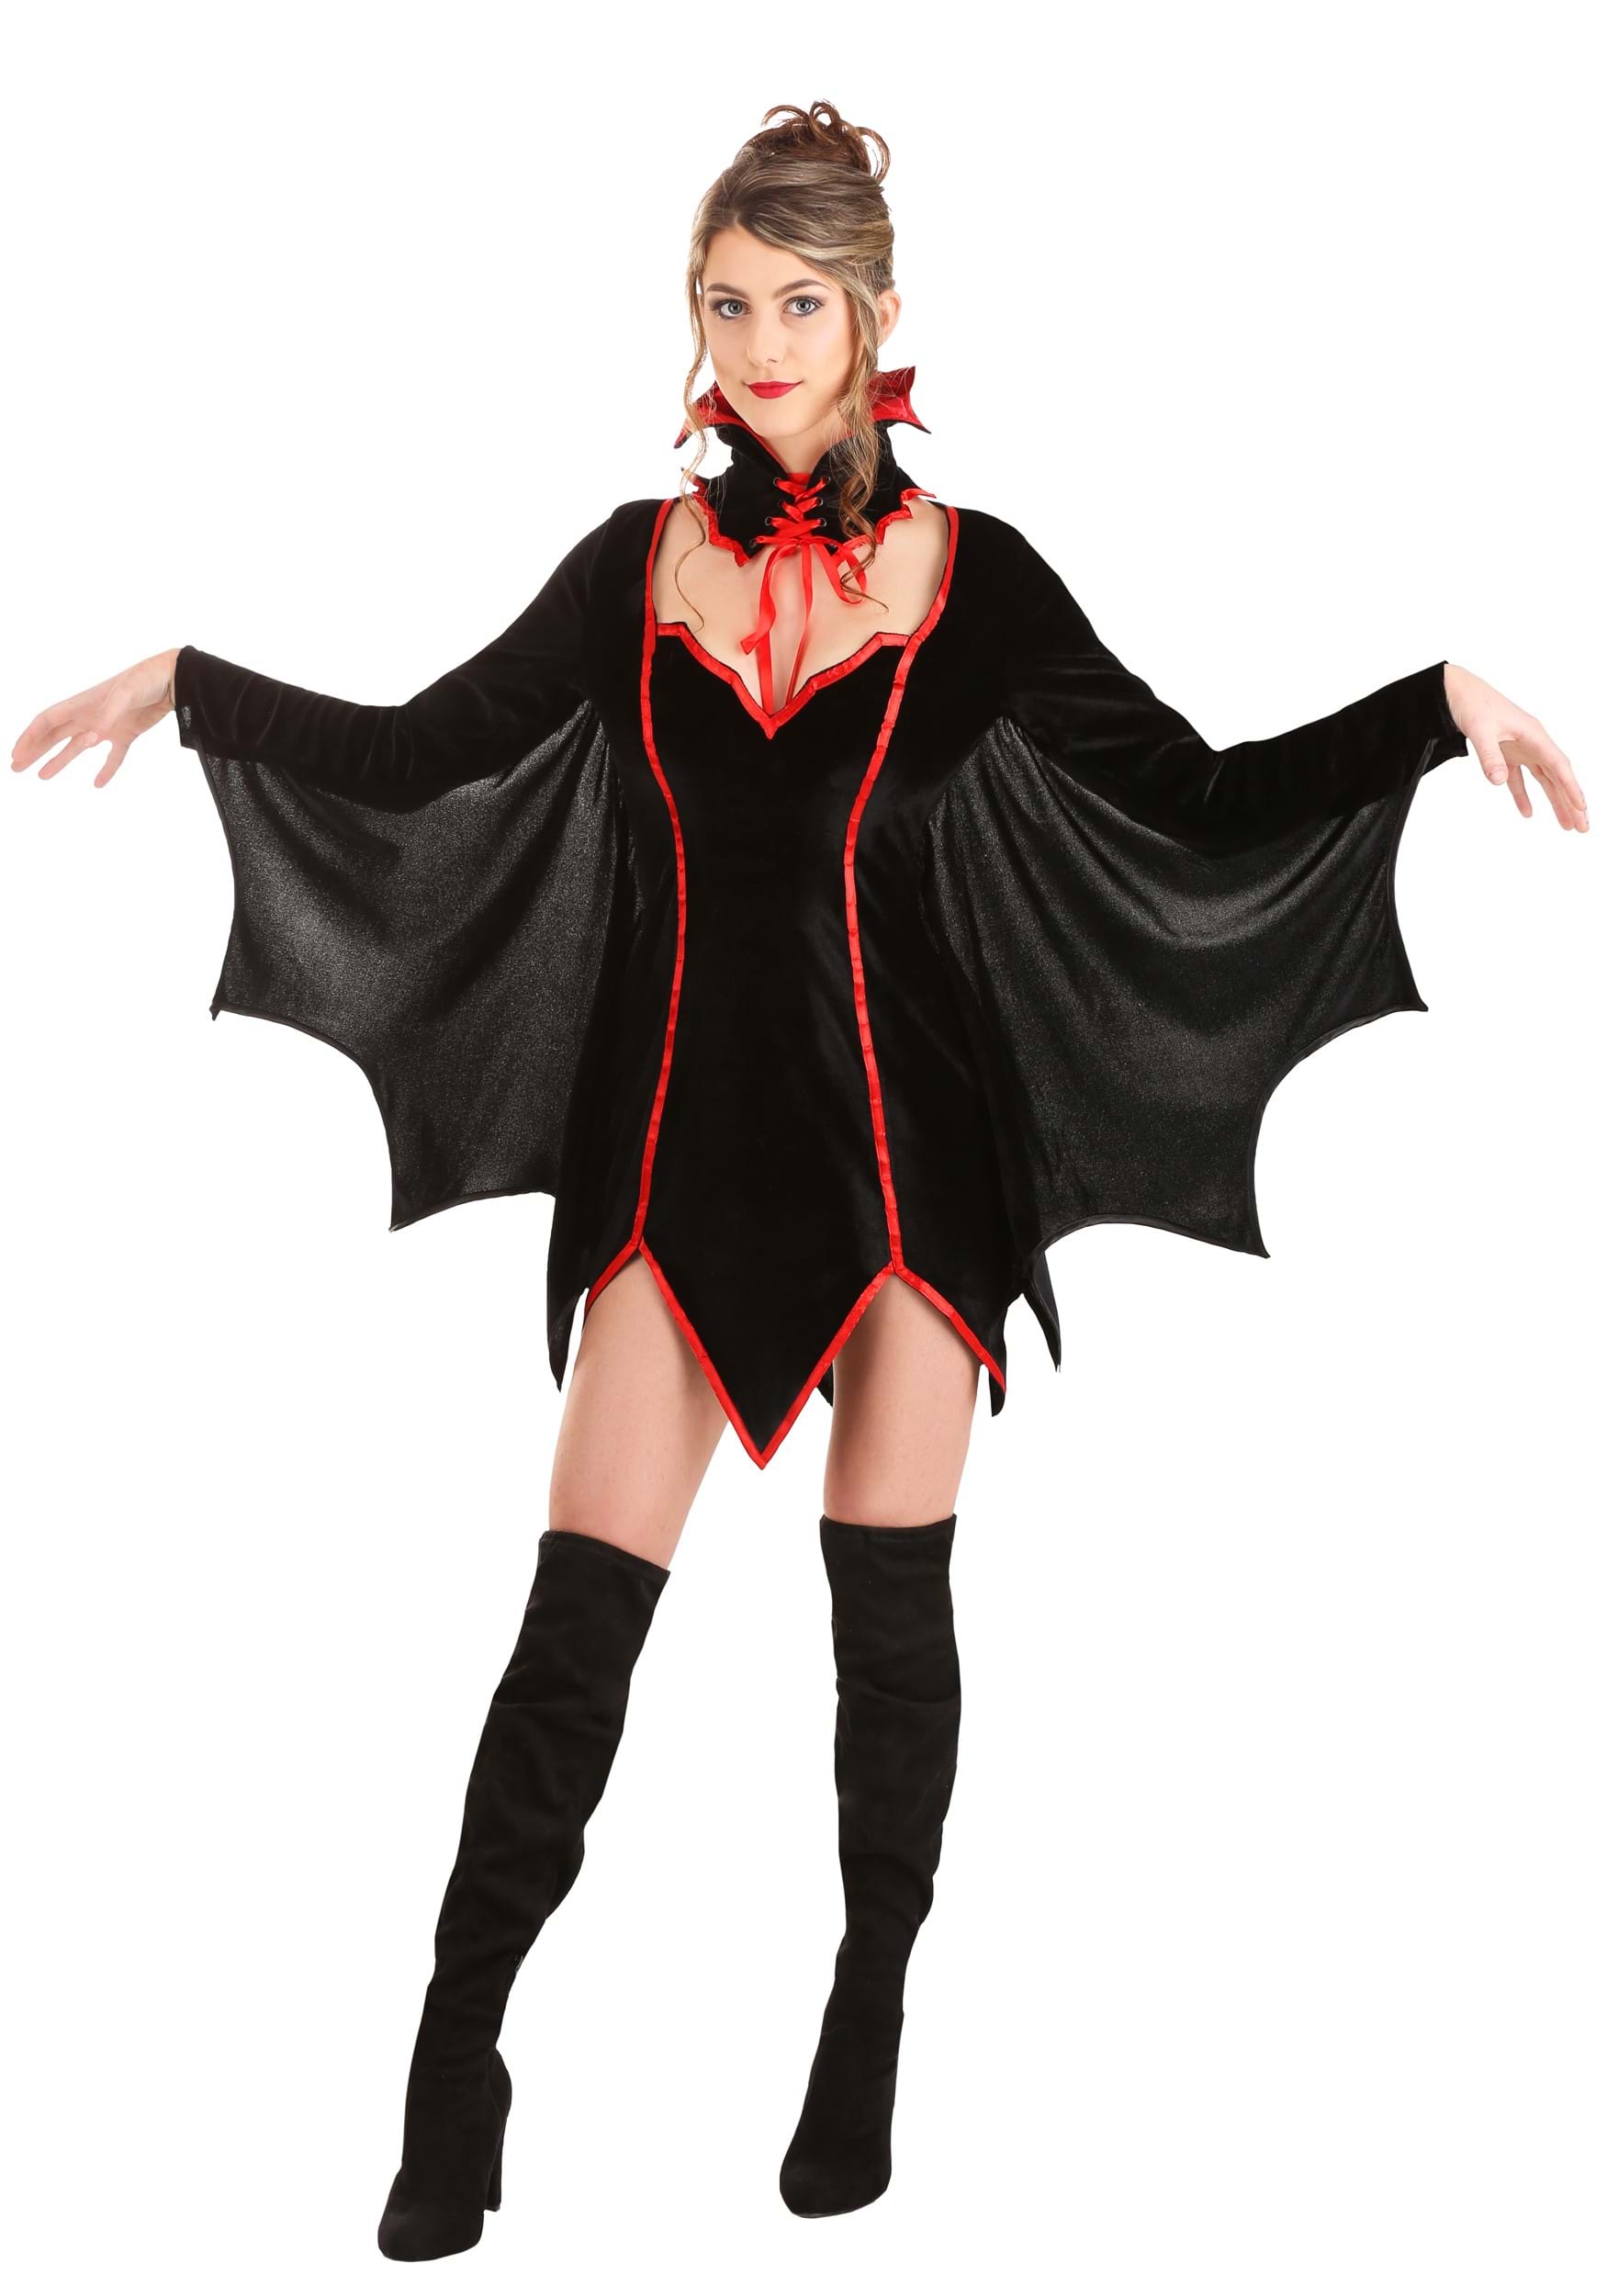 Photos - Fancy Dress FUN Costumes Exclusive Lady Dracula Costume Black/Red FUN7123AD